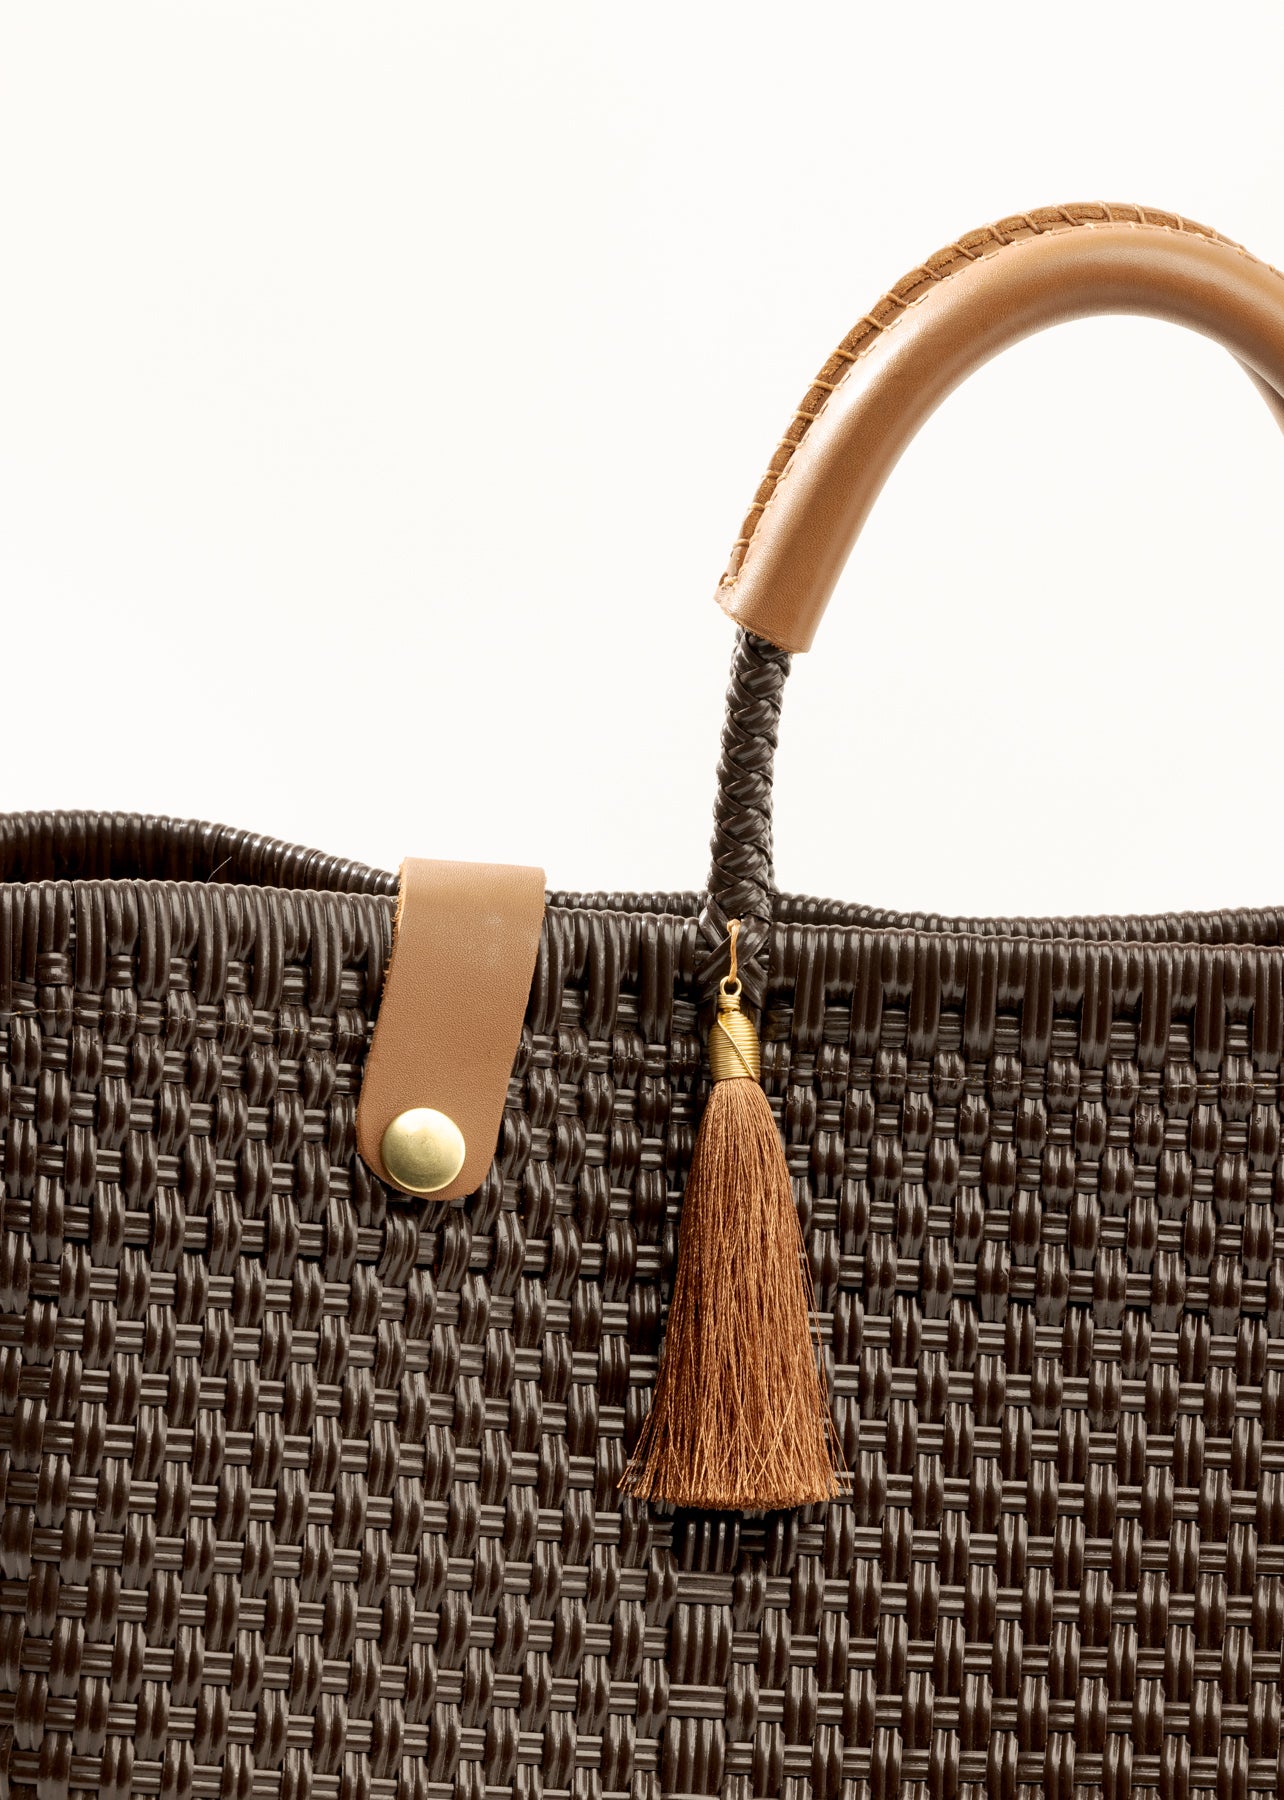 Closeup of brown woven material, leather straps, and tassel on handbag